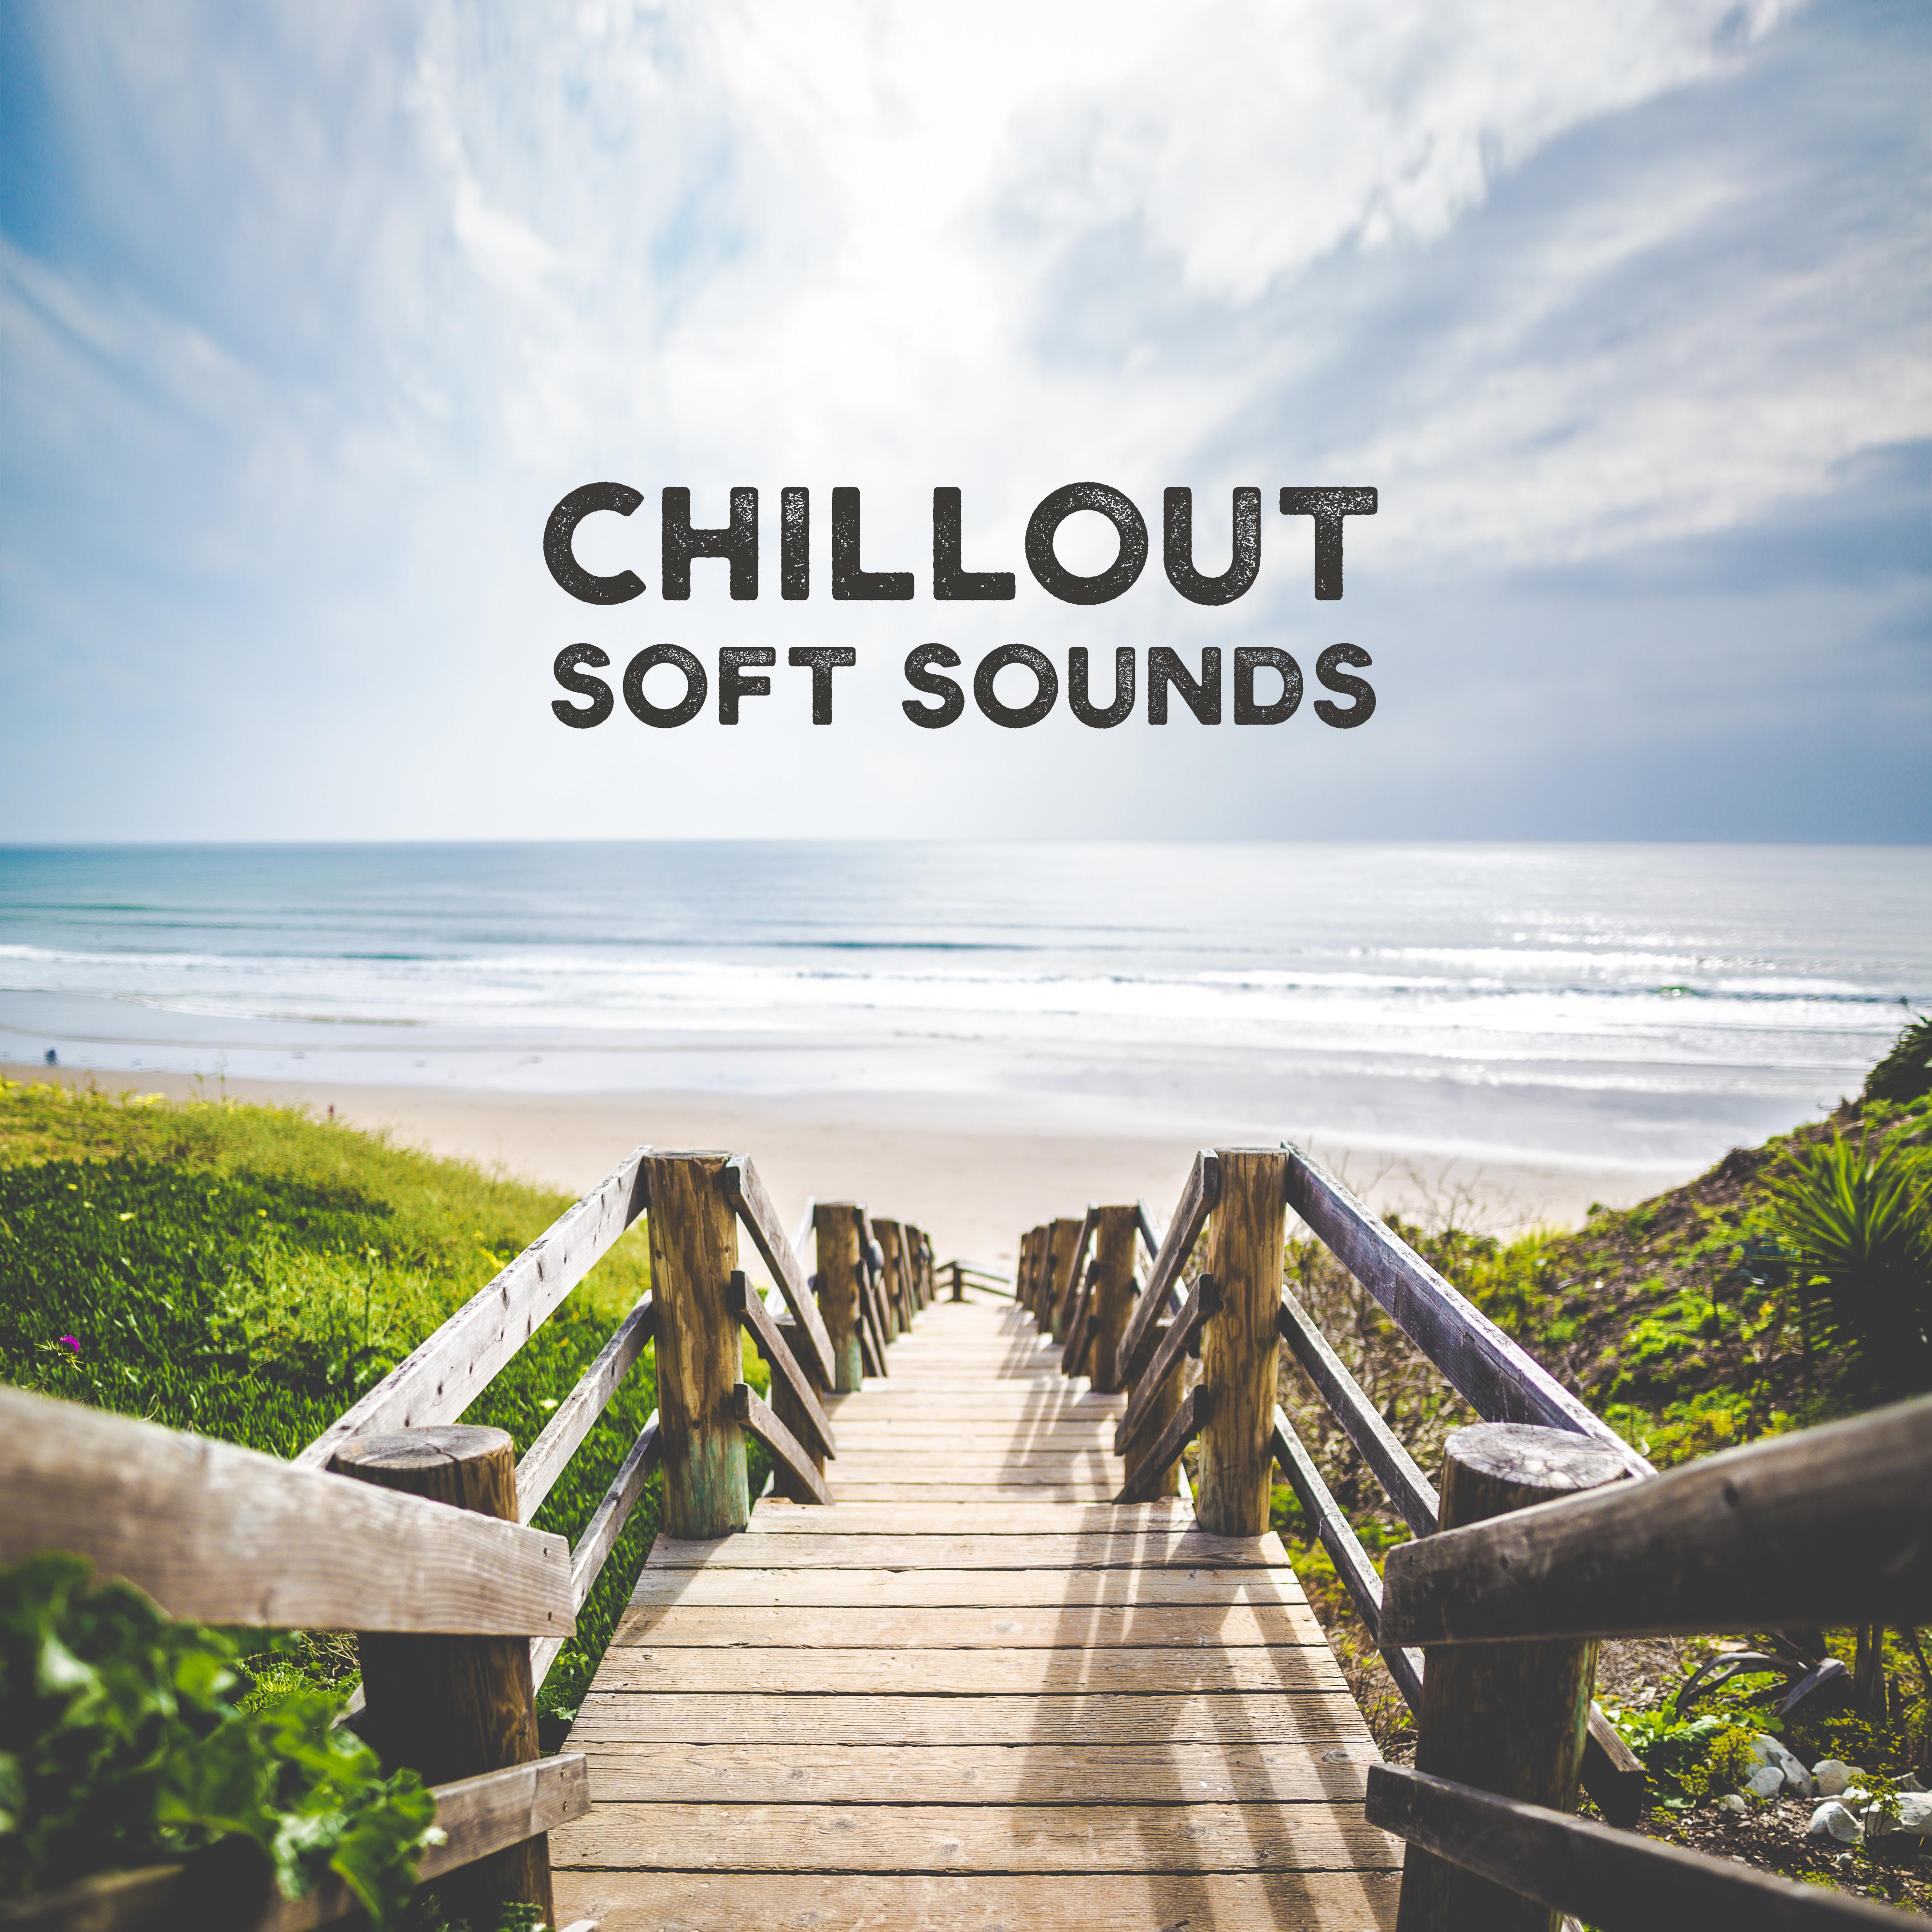 Chillout Soft Sounds – Music for Relax Under the Palms, Chilling Vibes